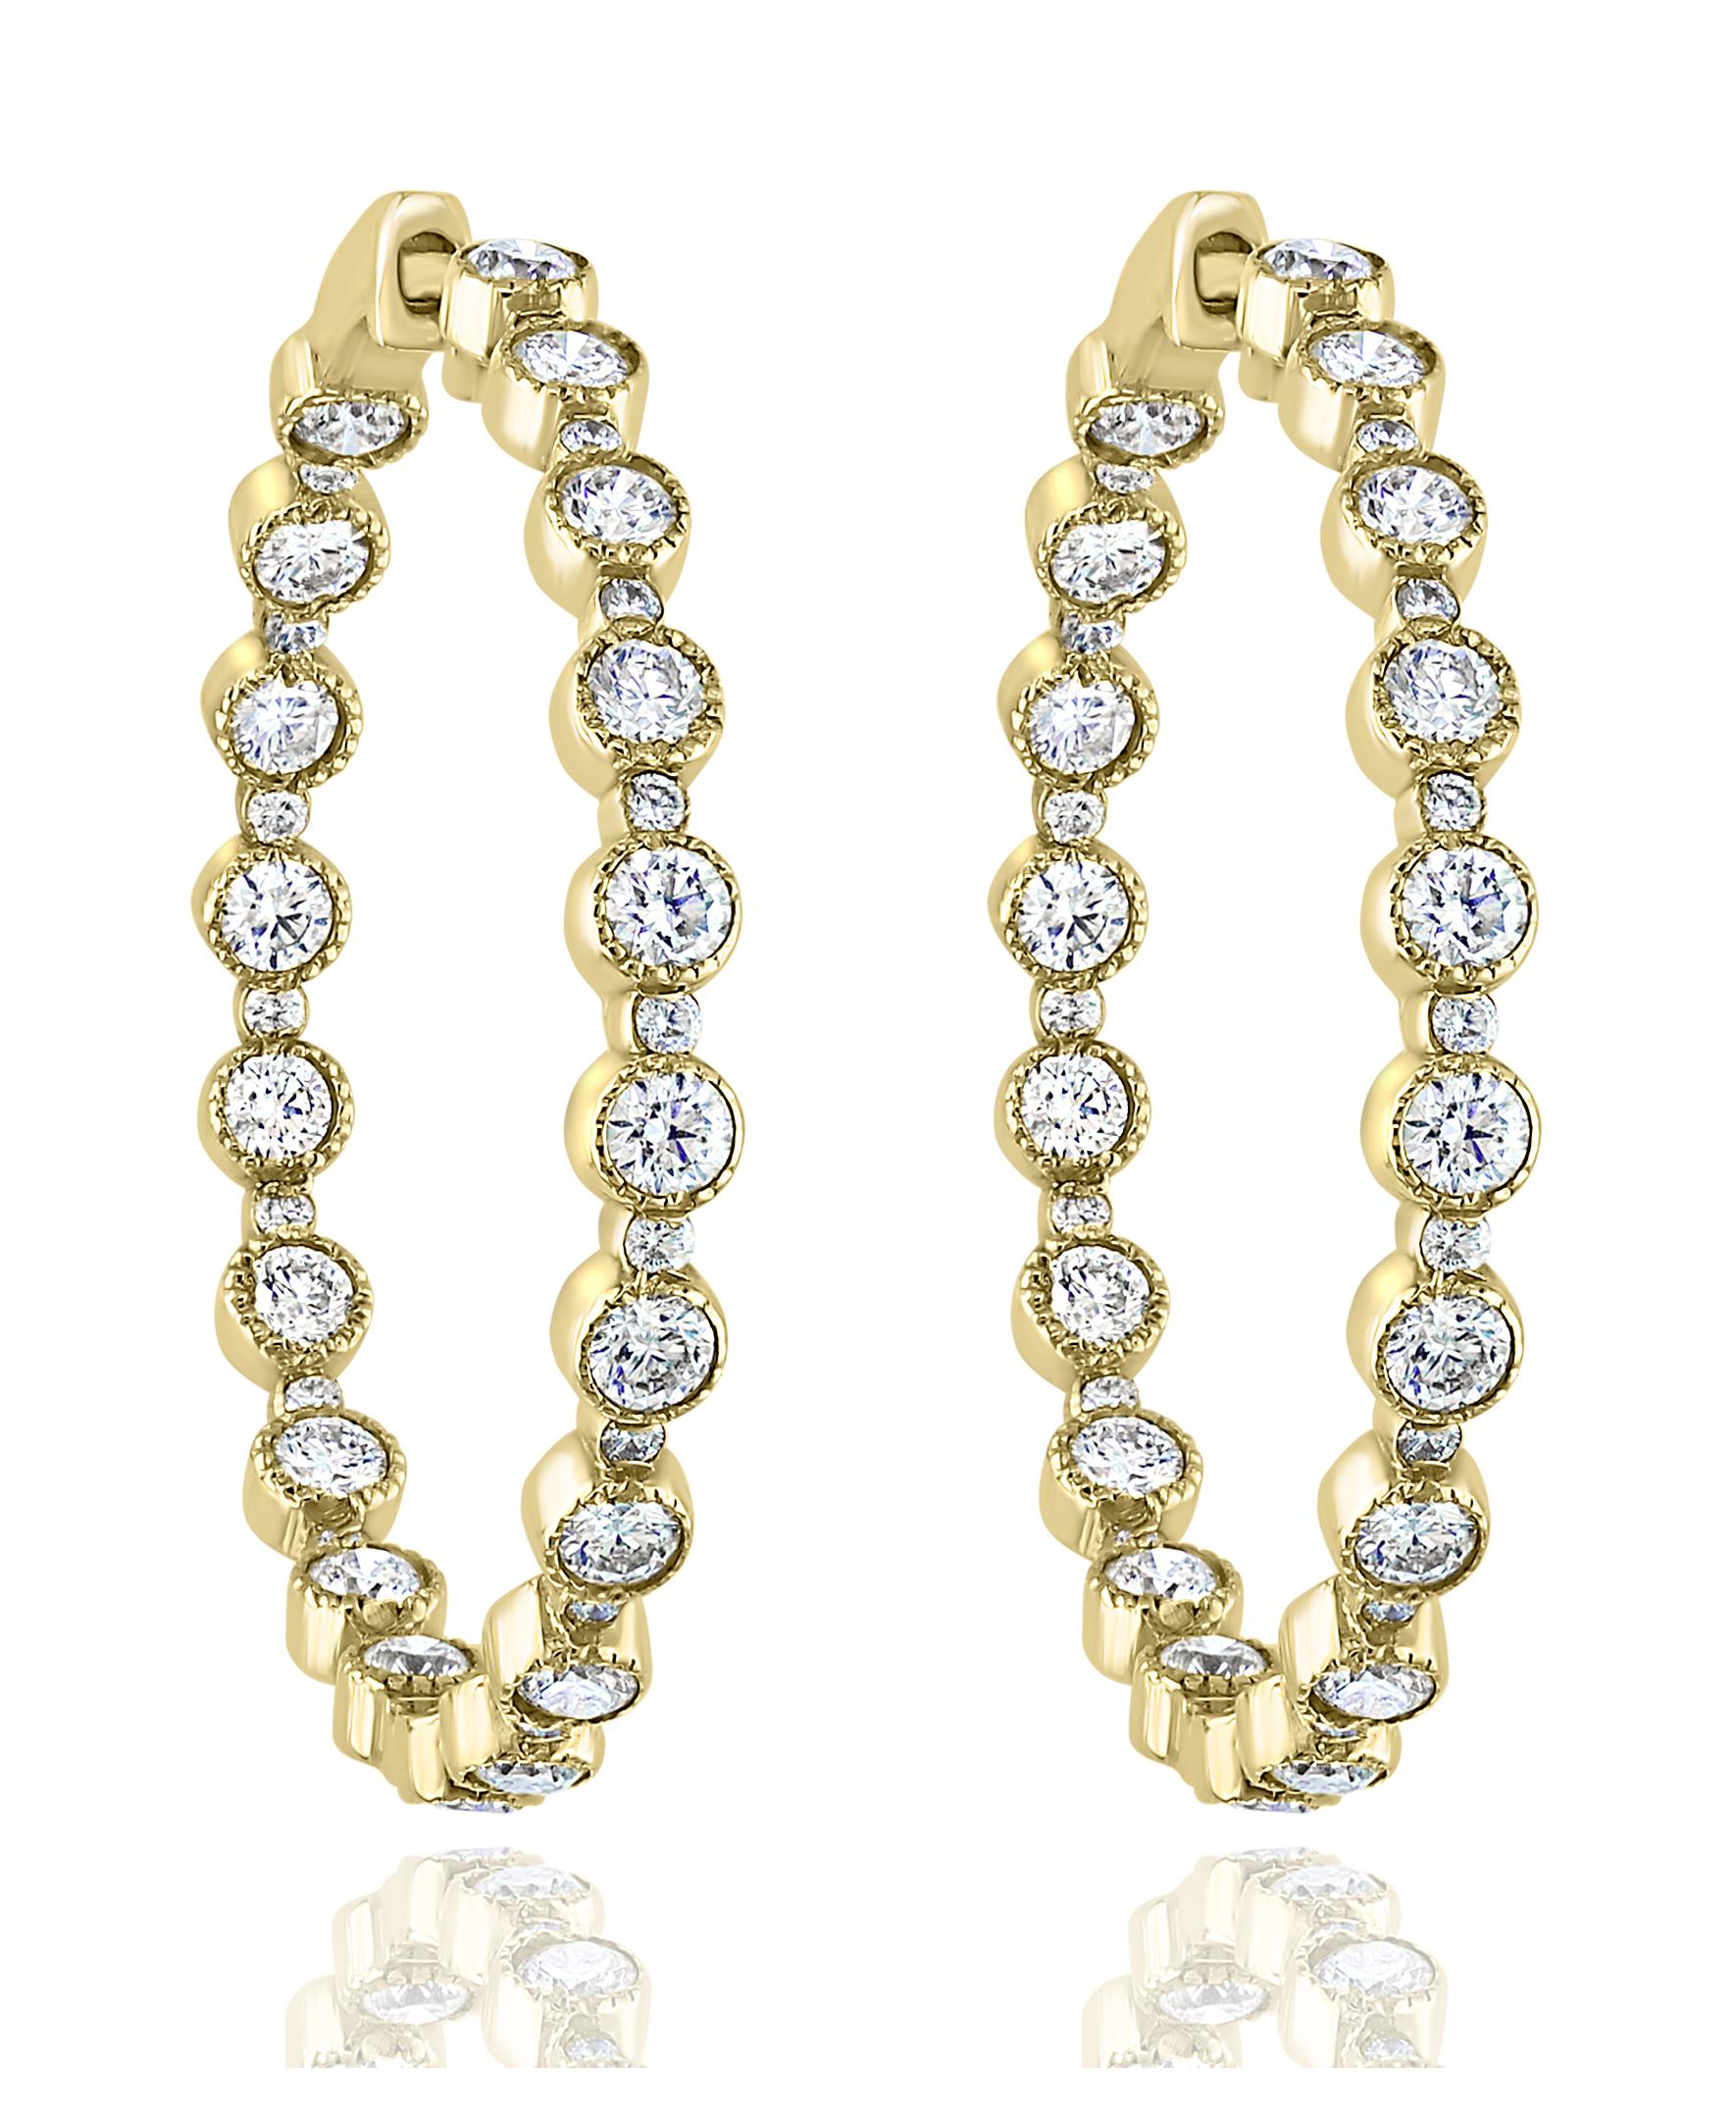 Features a row of round brilliant diamonds, with push button lock made in 14K Yellow Gold. 76 Diamonds weigh 5.57 carats total.

All diamonds are GH color SI1 Clarity.
Available in White and Rose Gold.
Style available in different price ranges.